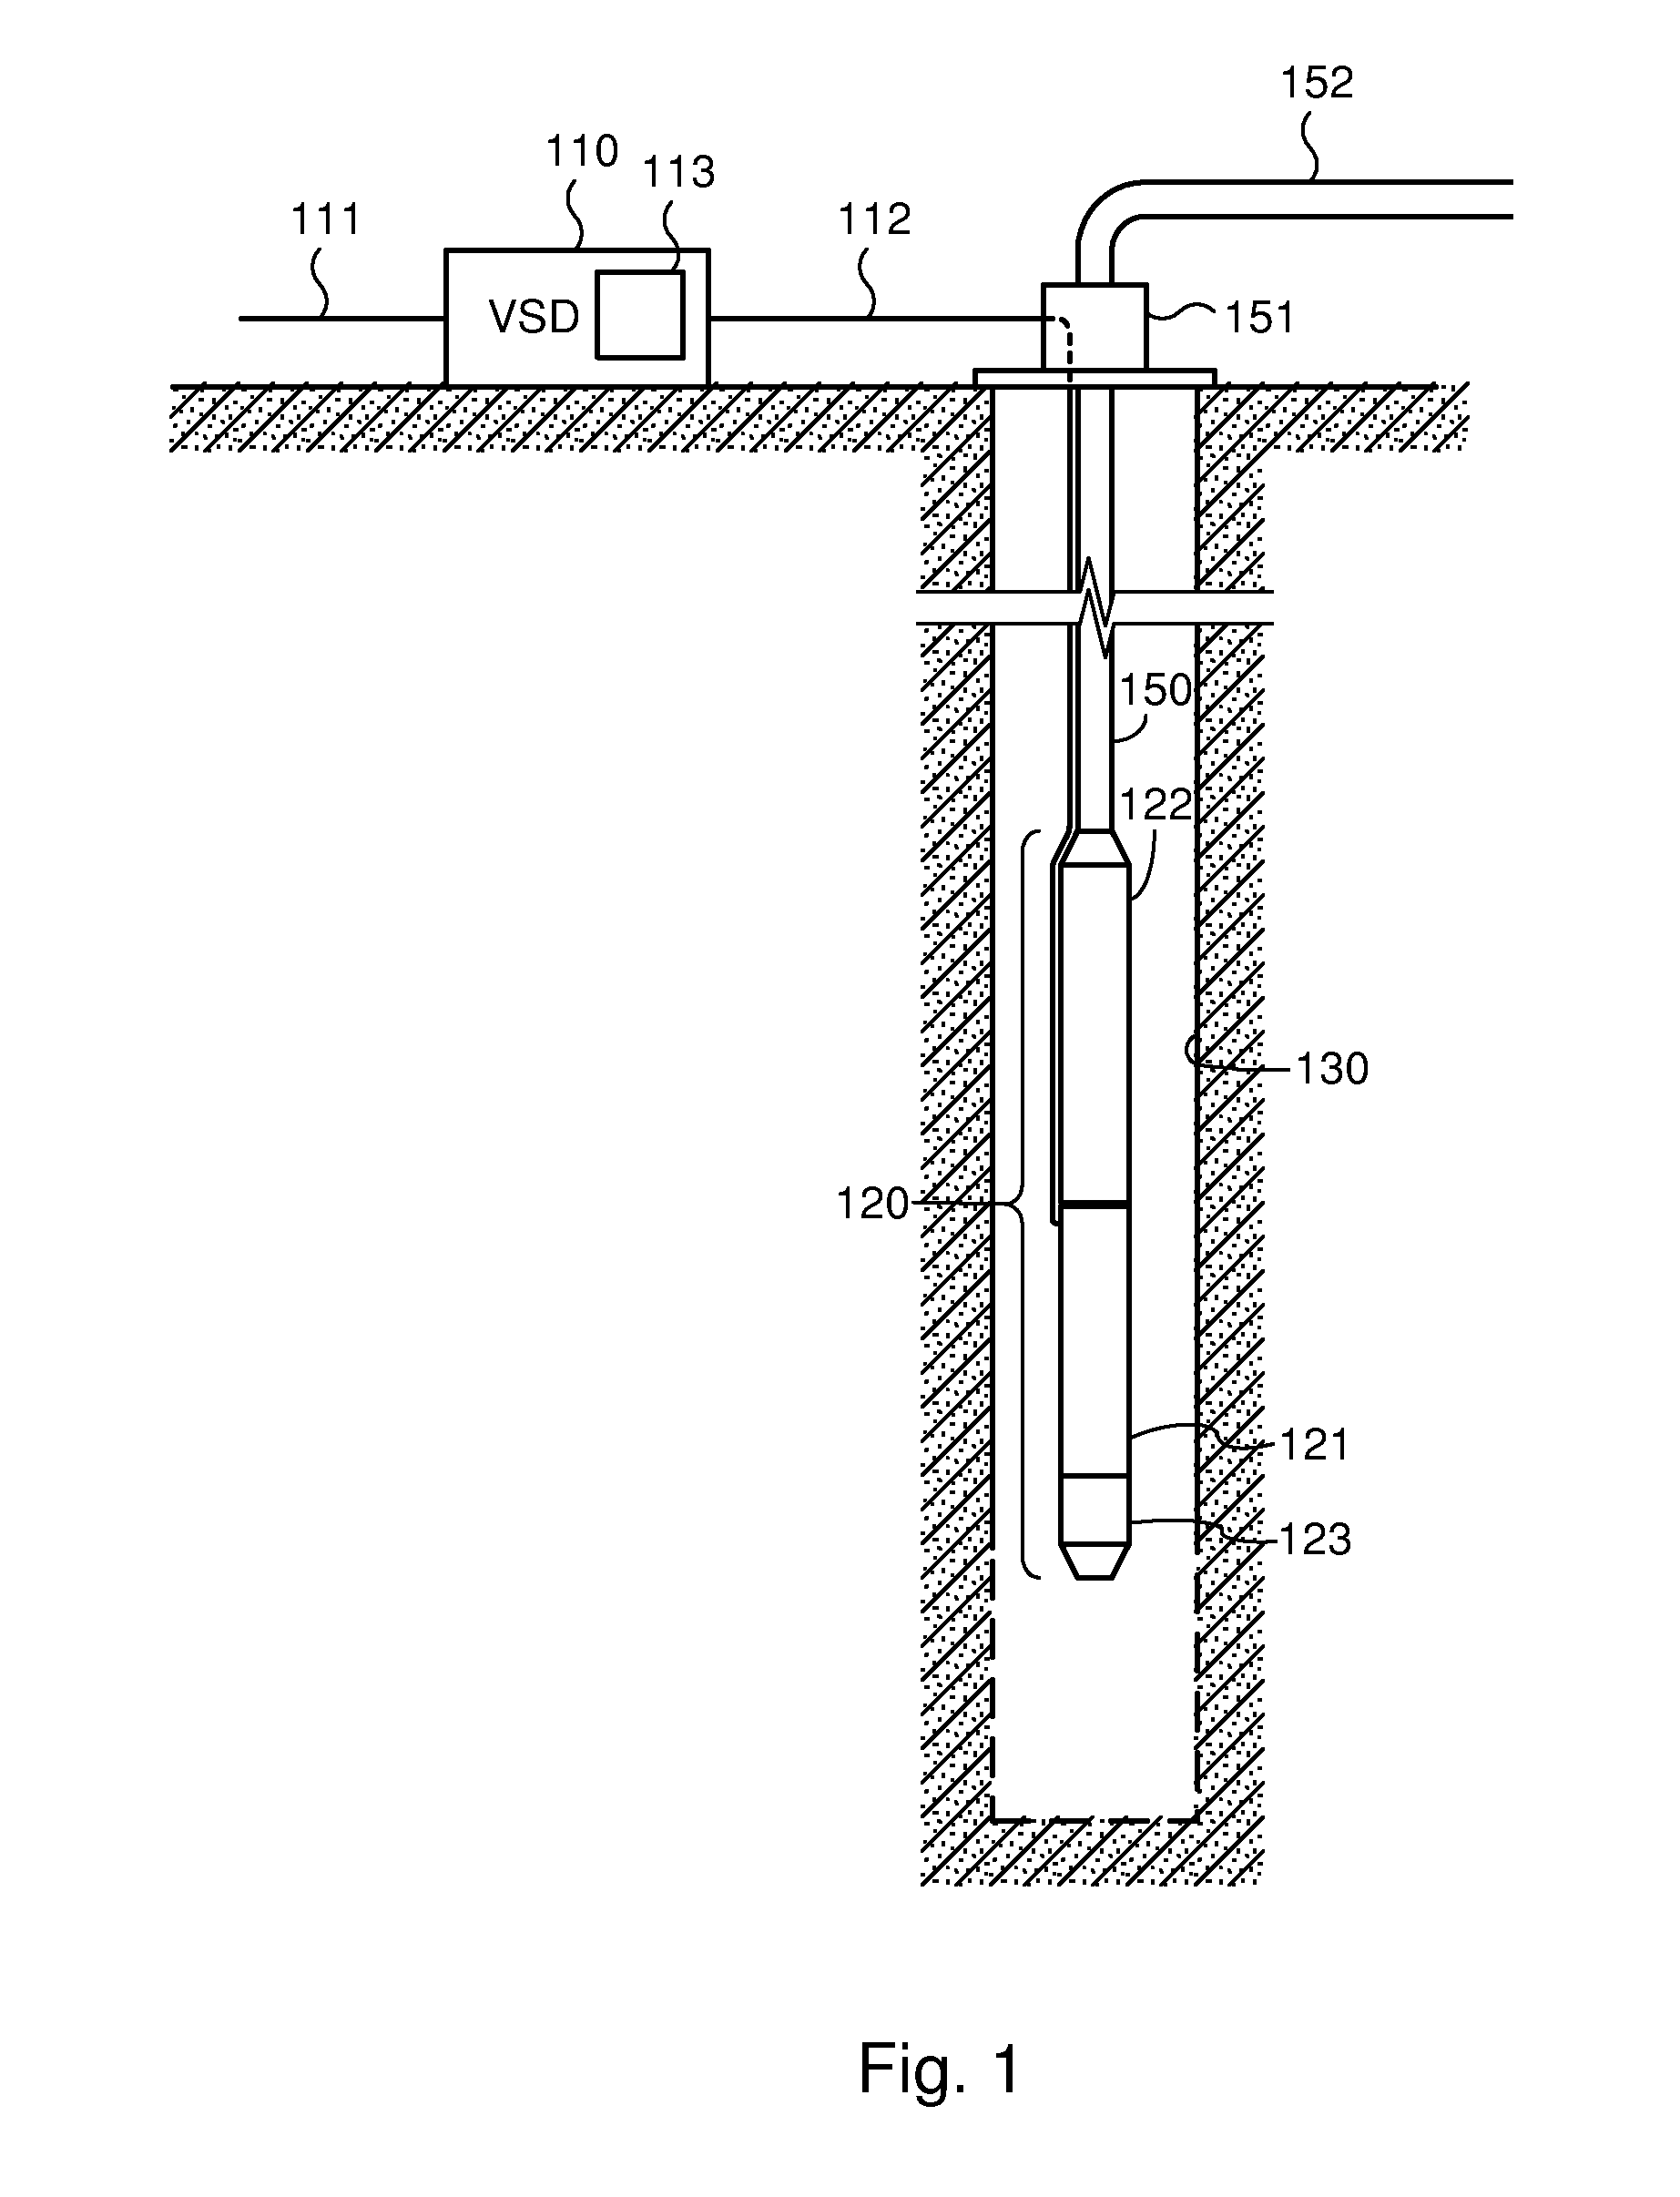 Systems and Methods for Downhole OFDM Communications